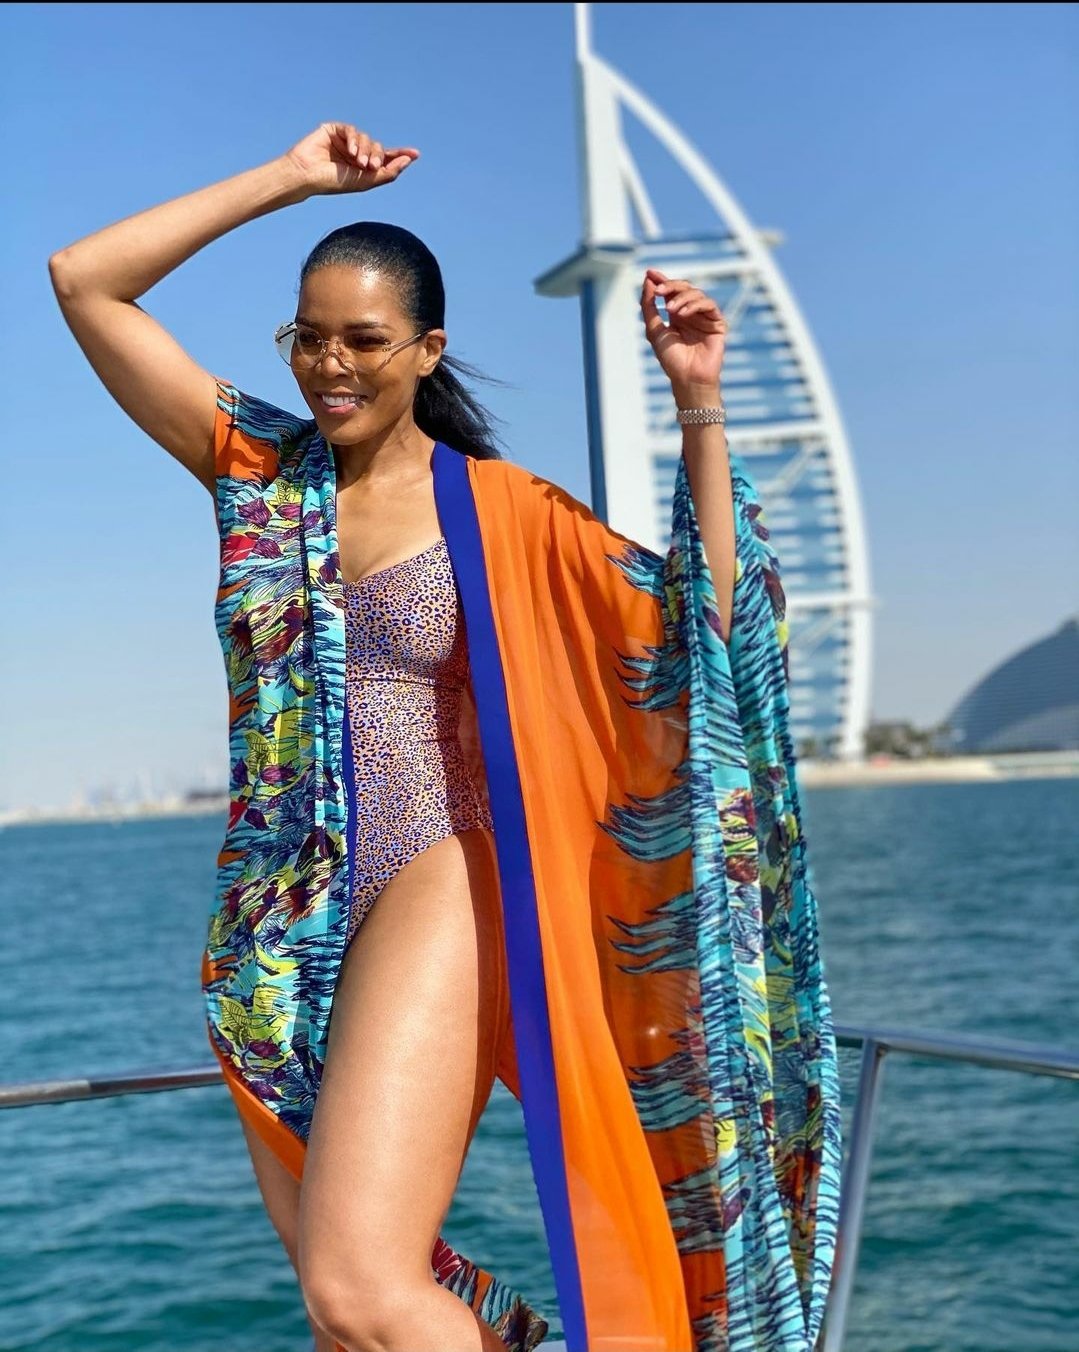  Connie Ferguson Reacted To The Prognosis That She Has Breast Cancer